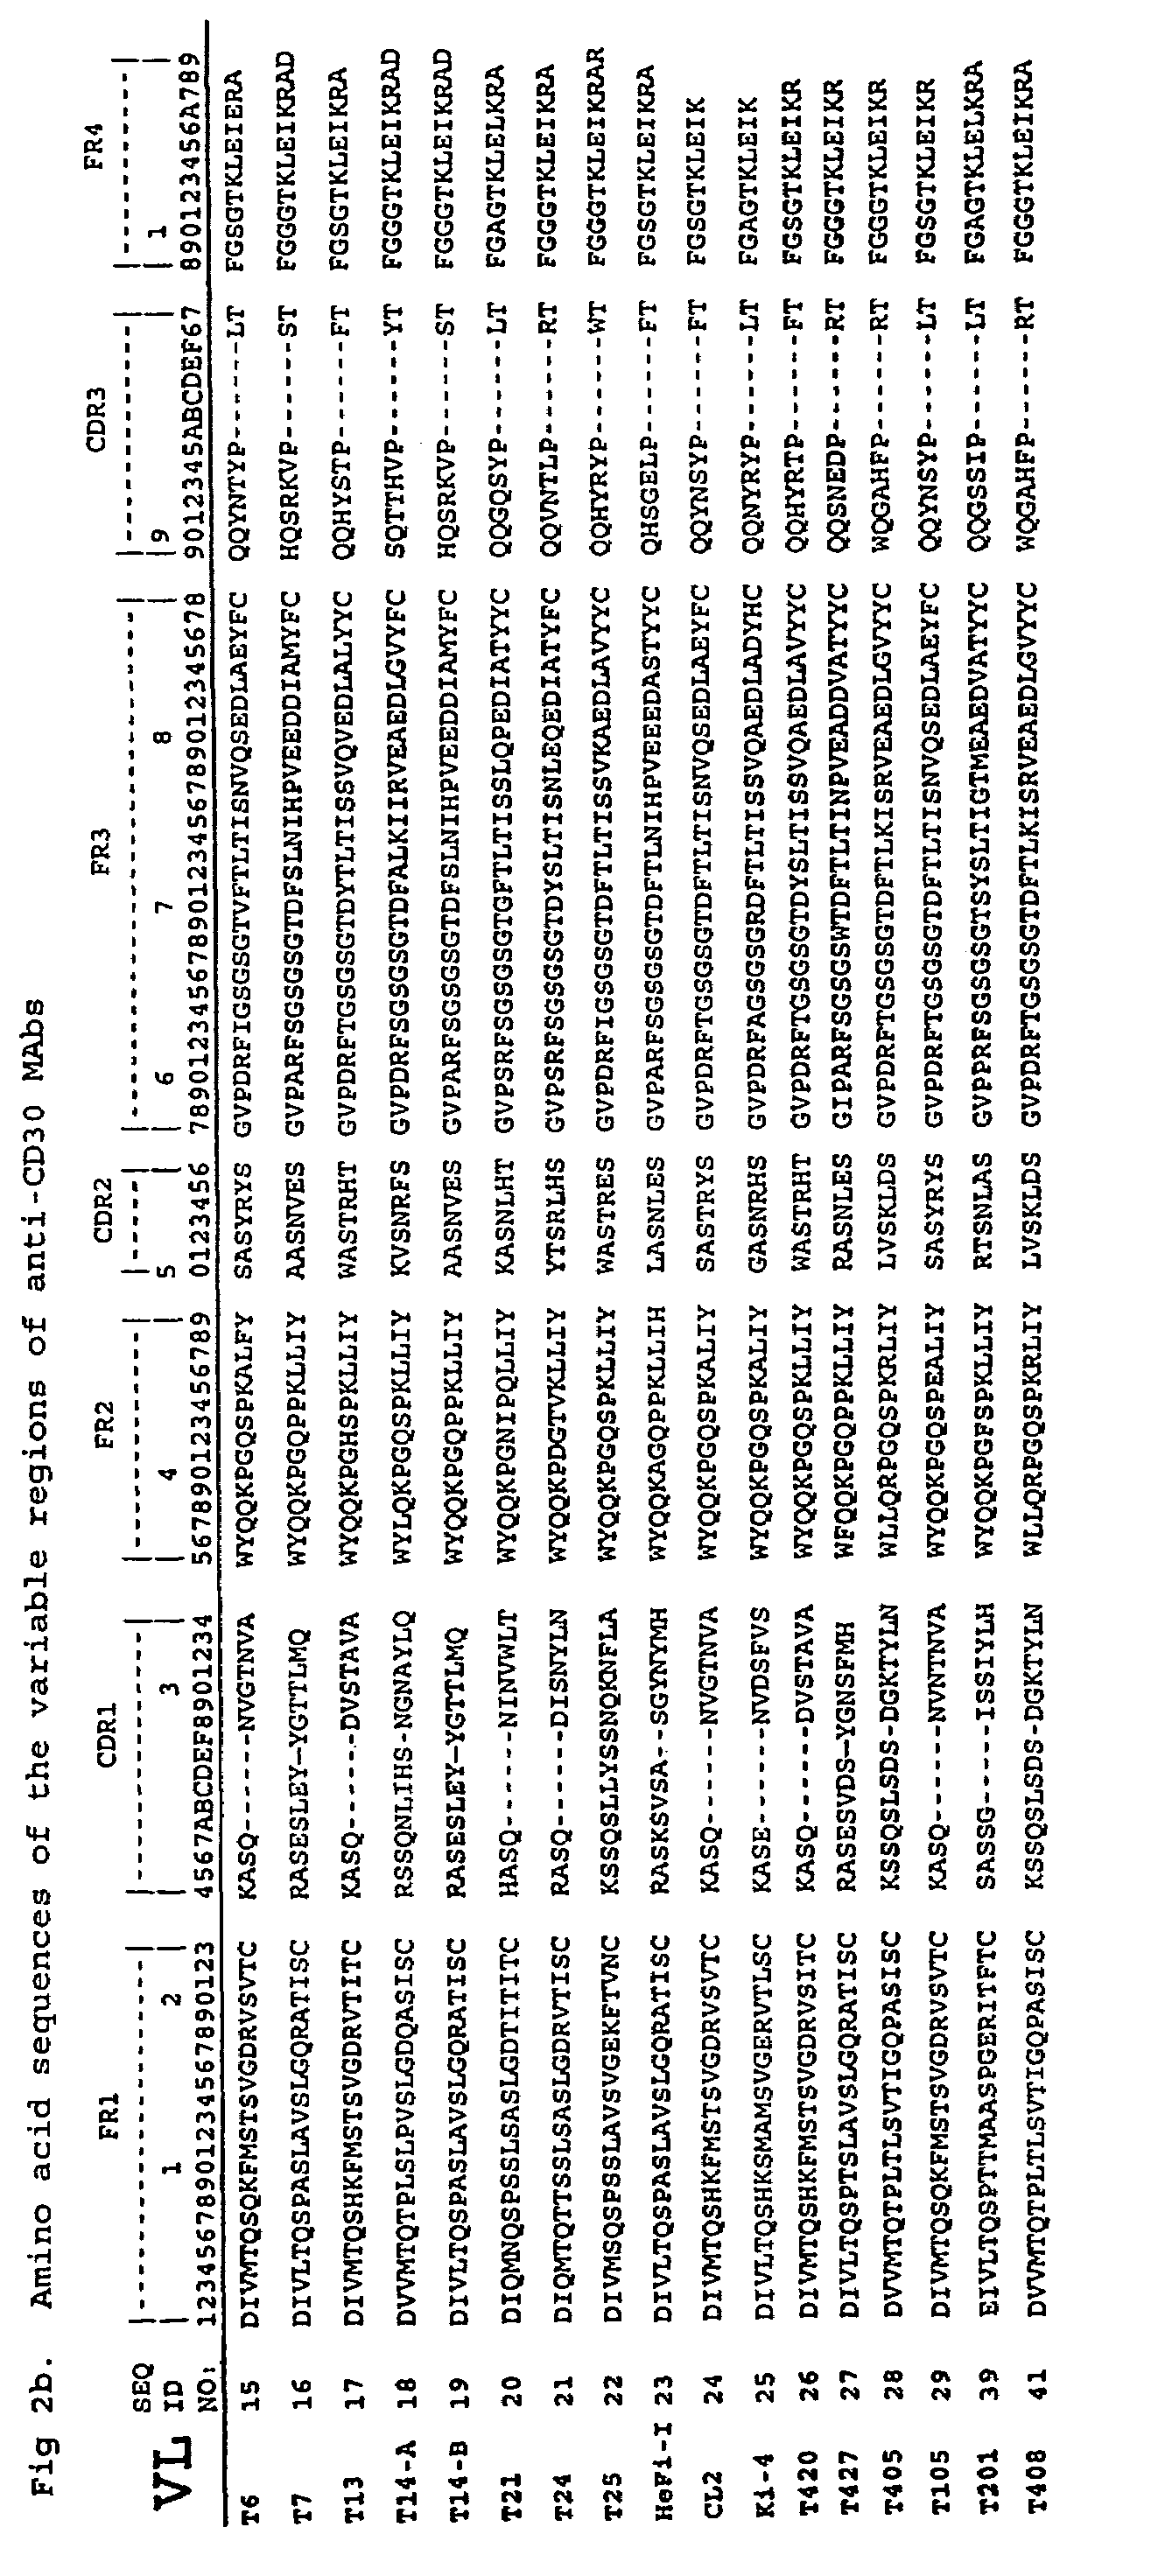 Anti-CD30 stalk and anti-CD30 antibodies suitable for use in immunotoxins